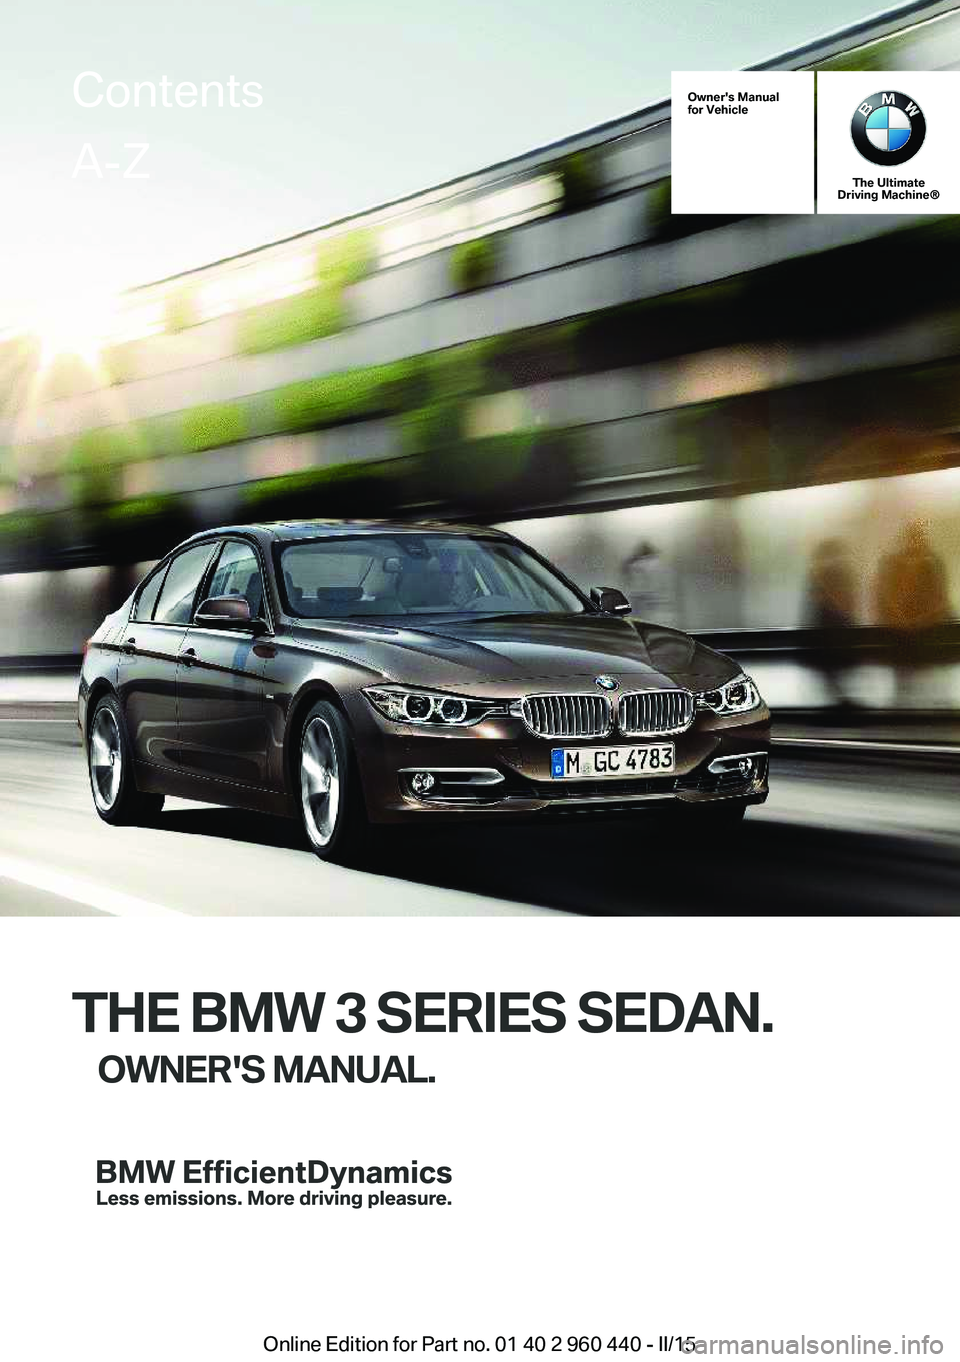 BMW 328D XDRIVE SEDAN 2016  Owners Manual Owner's Manual
for Vehicle
The Ultimate
Driving Machine®
THE BMW 3 SERIES SEDAN.
OWNER'S MANUAL.
ContentsA-Z
Online Edition for Part no. 01 40 2 960 440 - II/15   